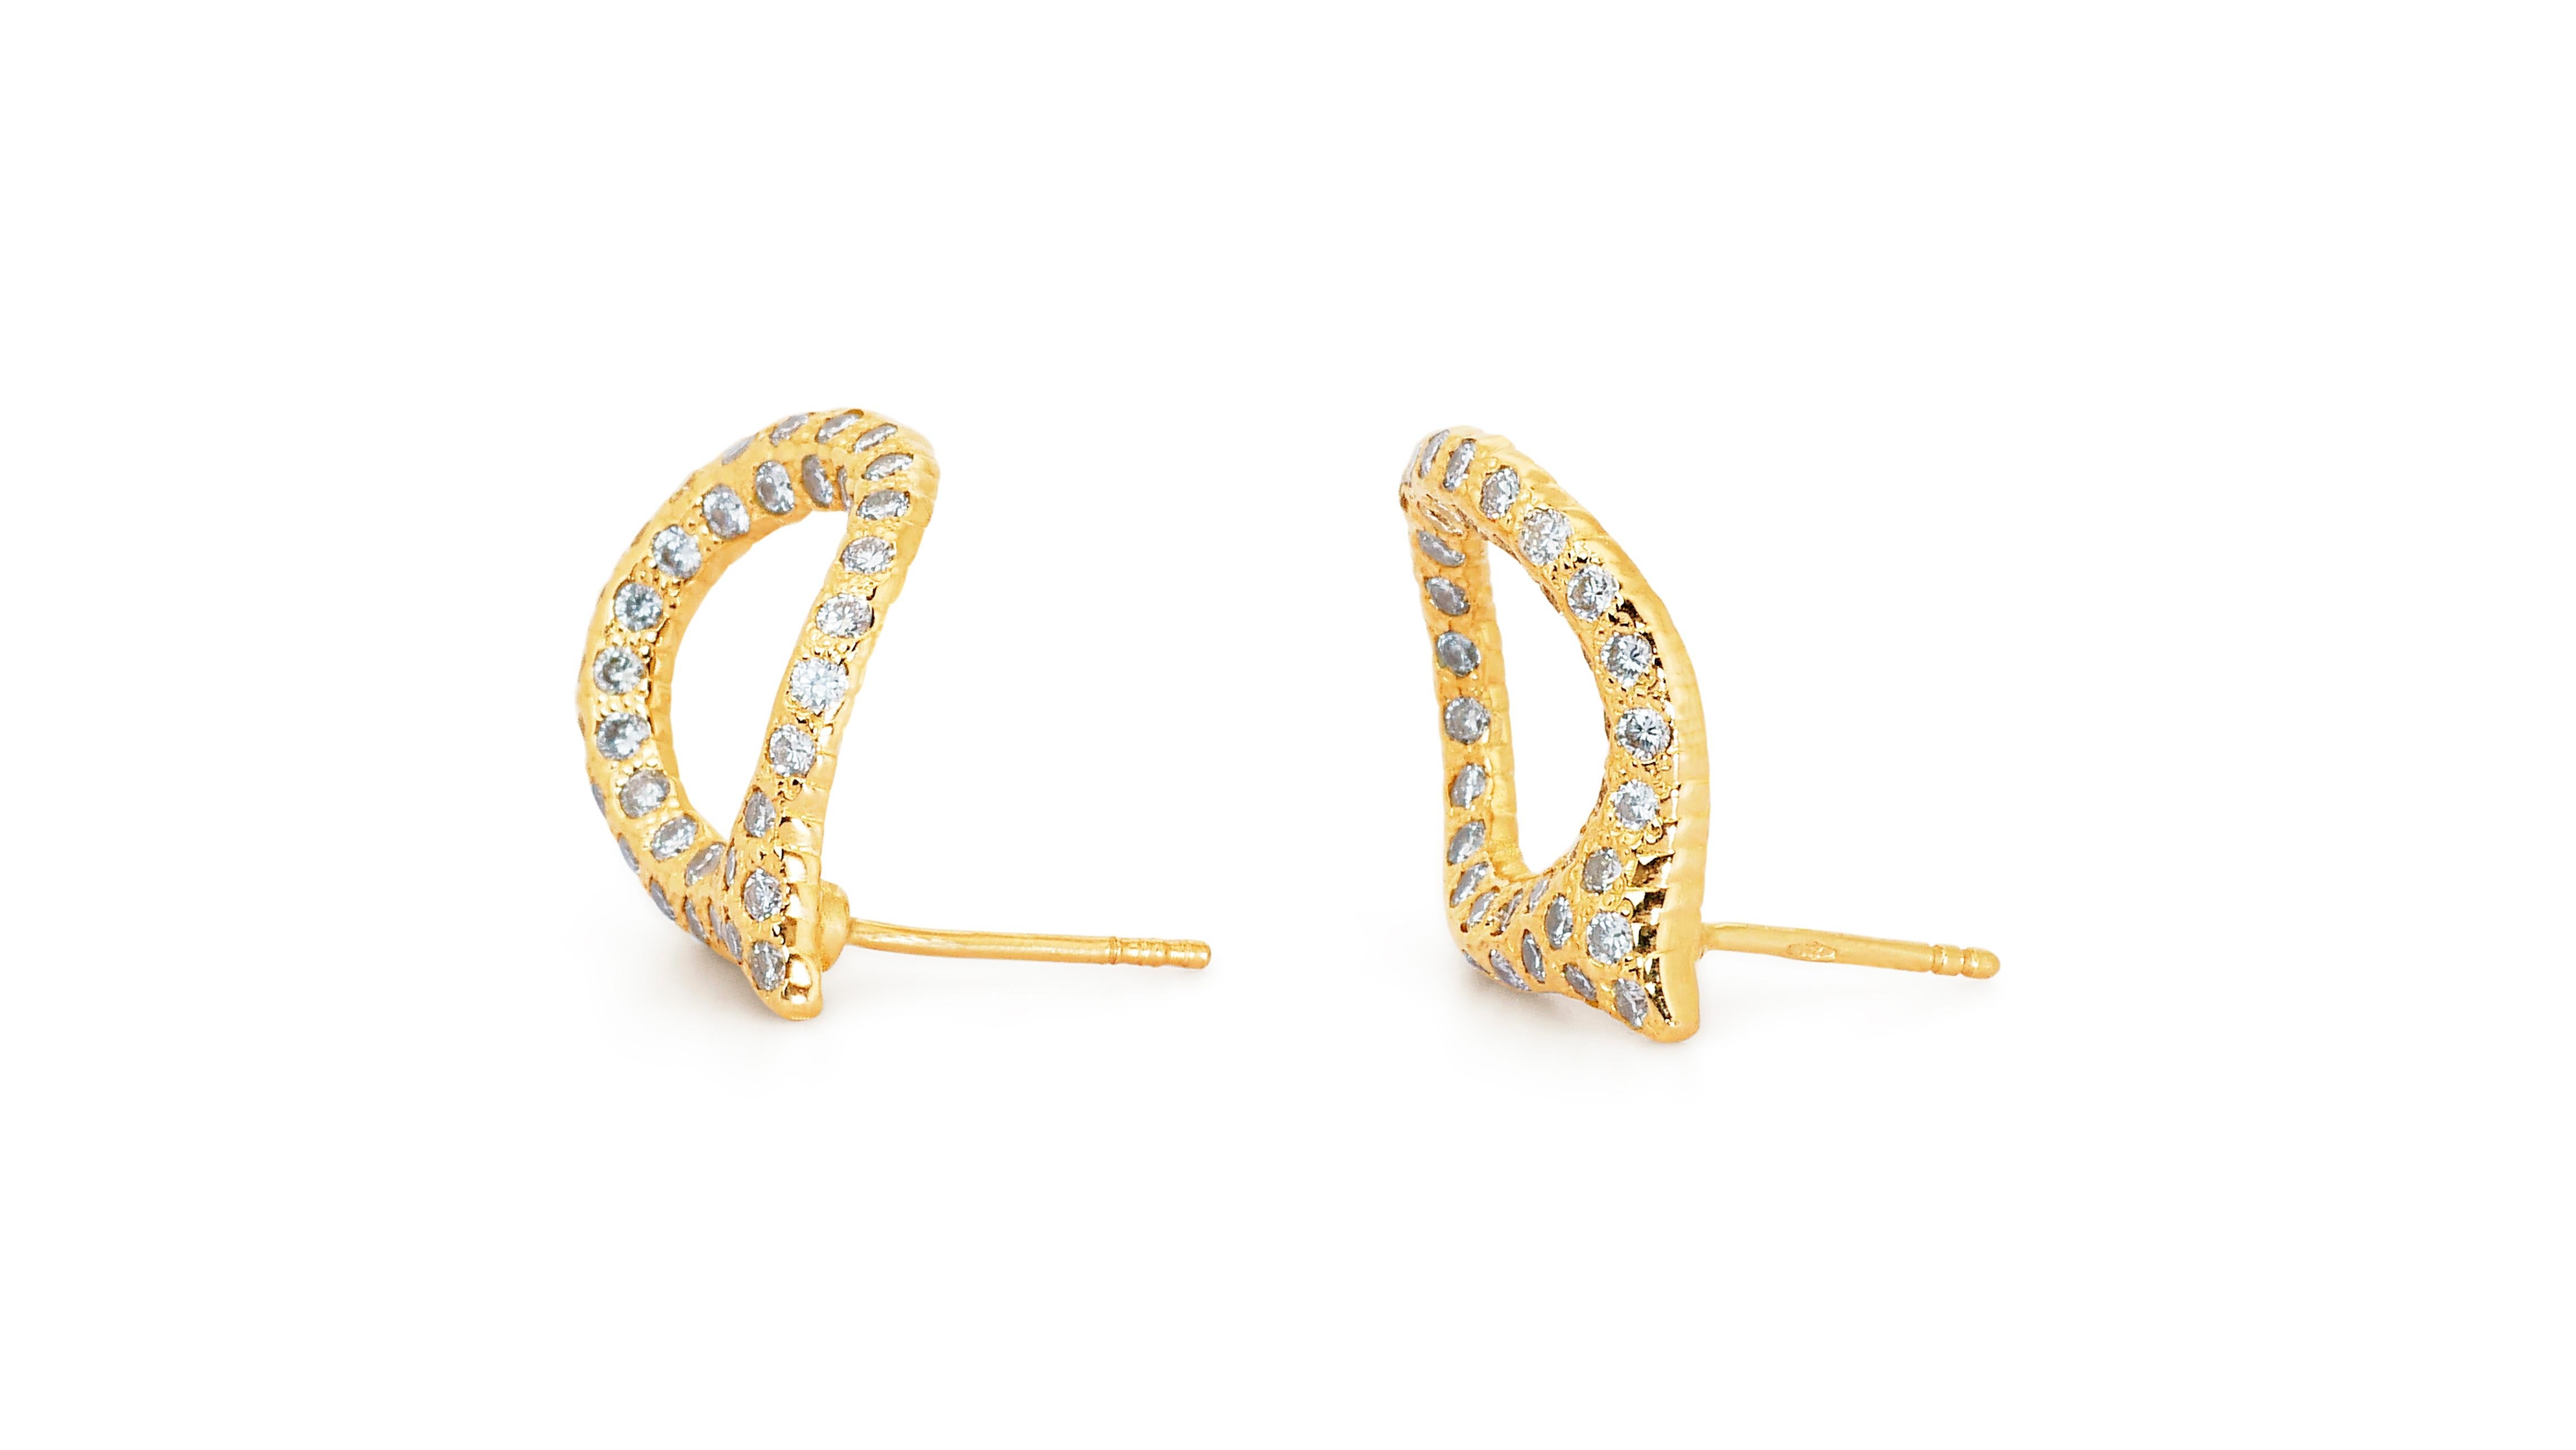 Round Cut Glamorous 18k Yellow Gold Earrings w/ 1.28ct Natural Diamonds IGI Certificate For Sale